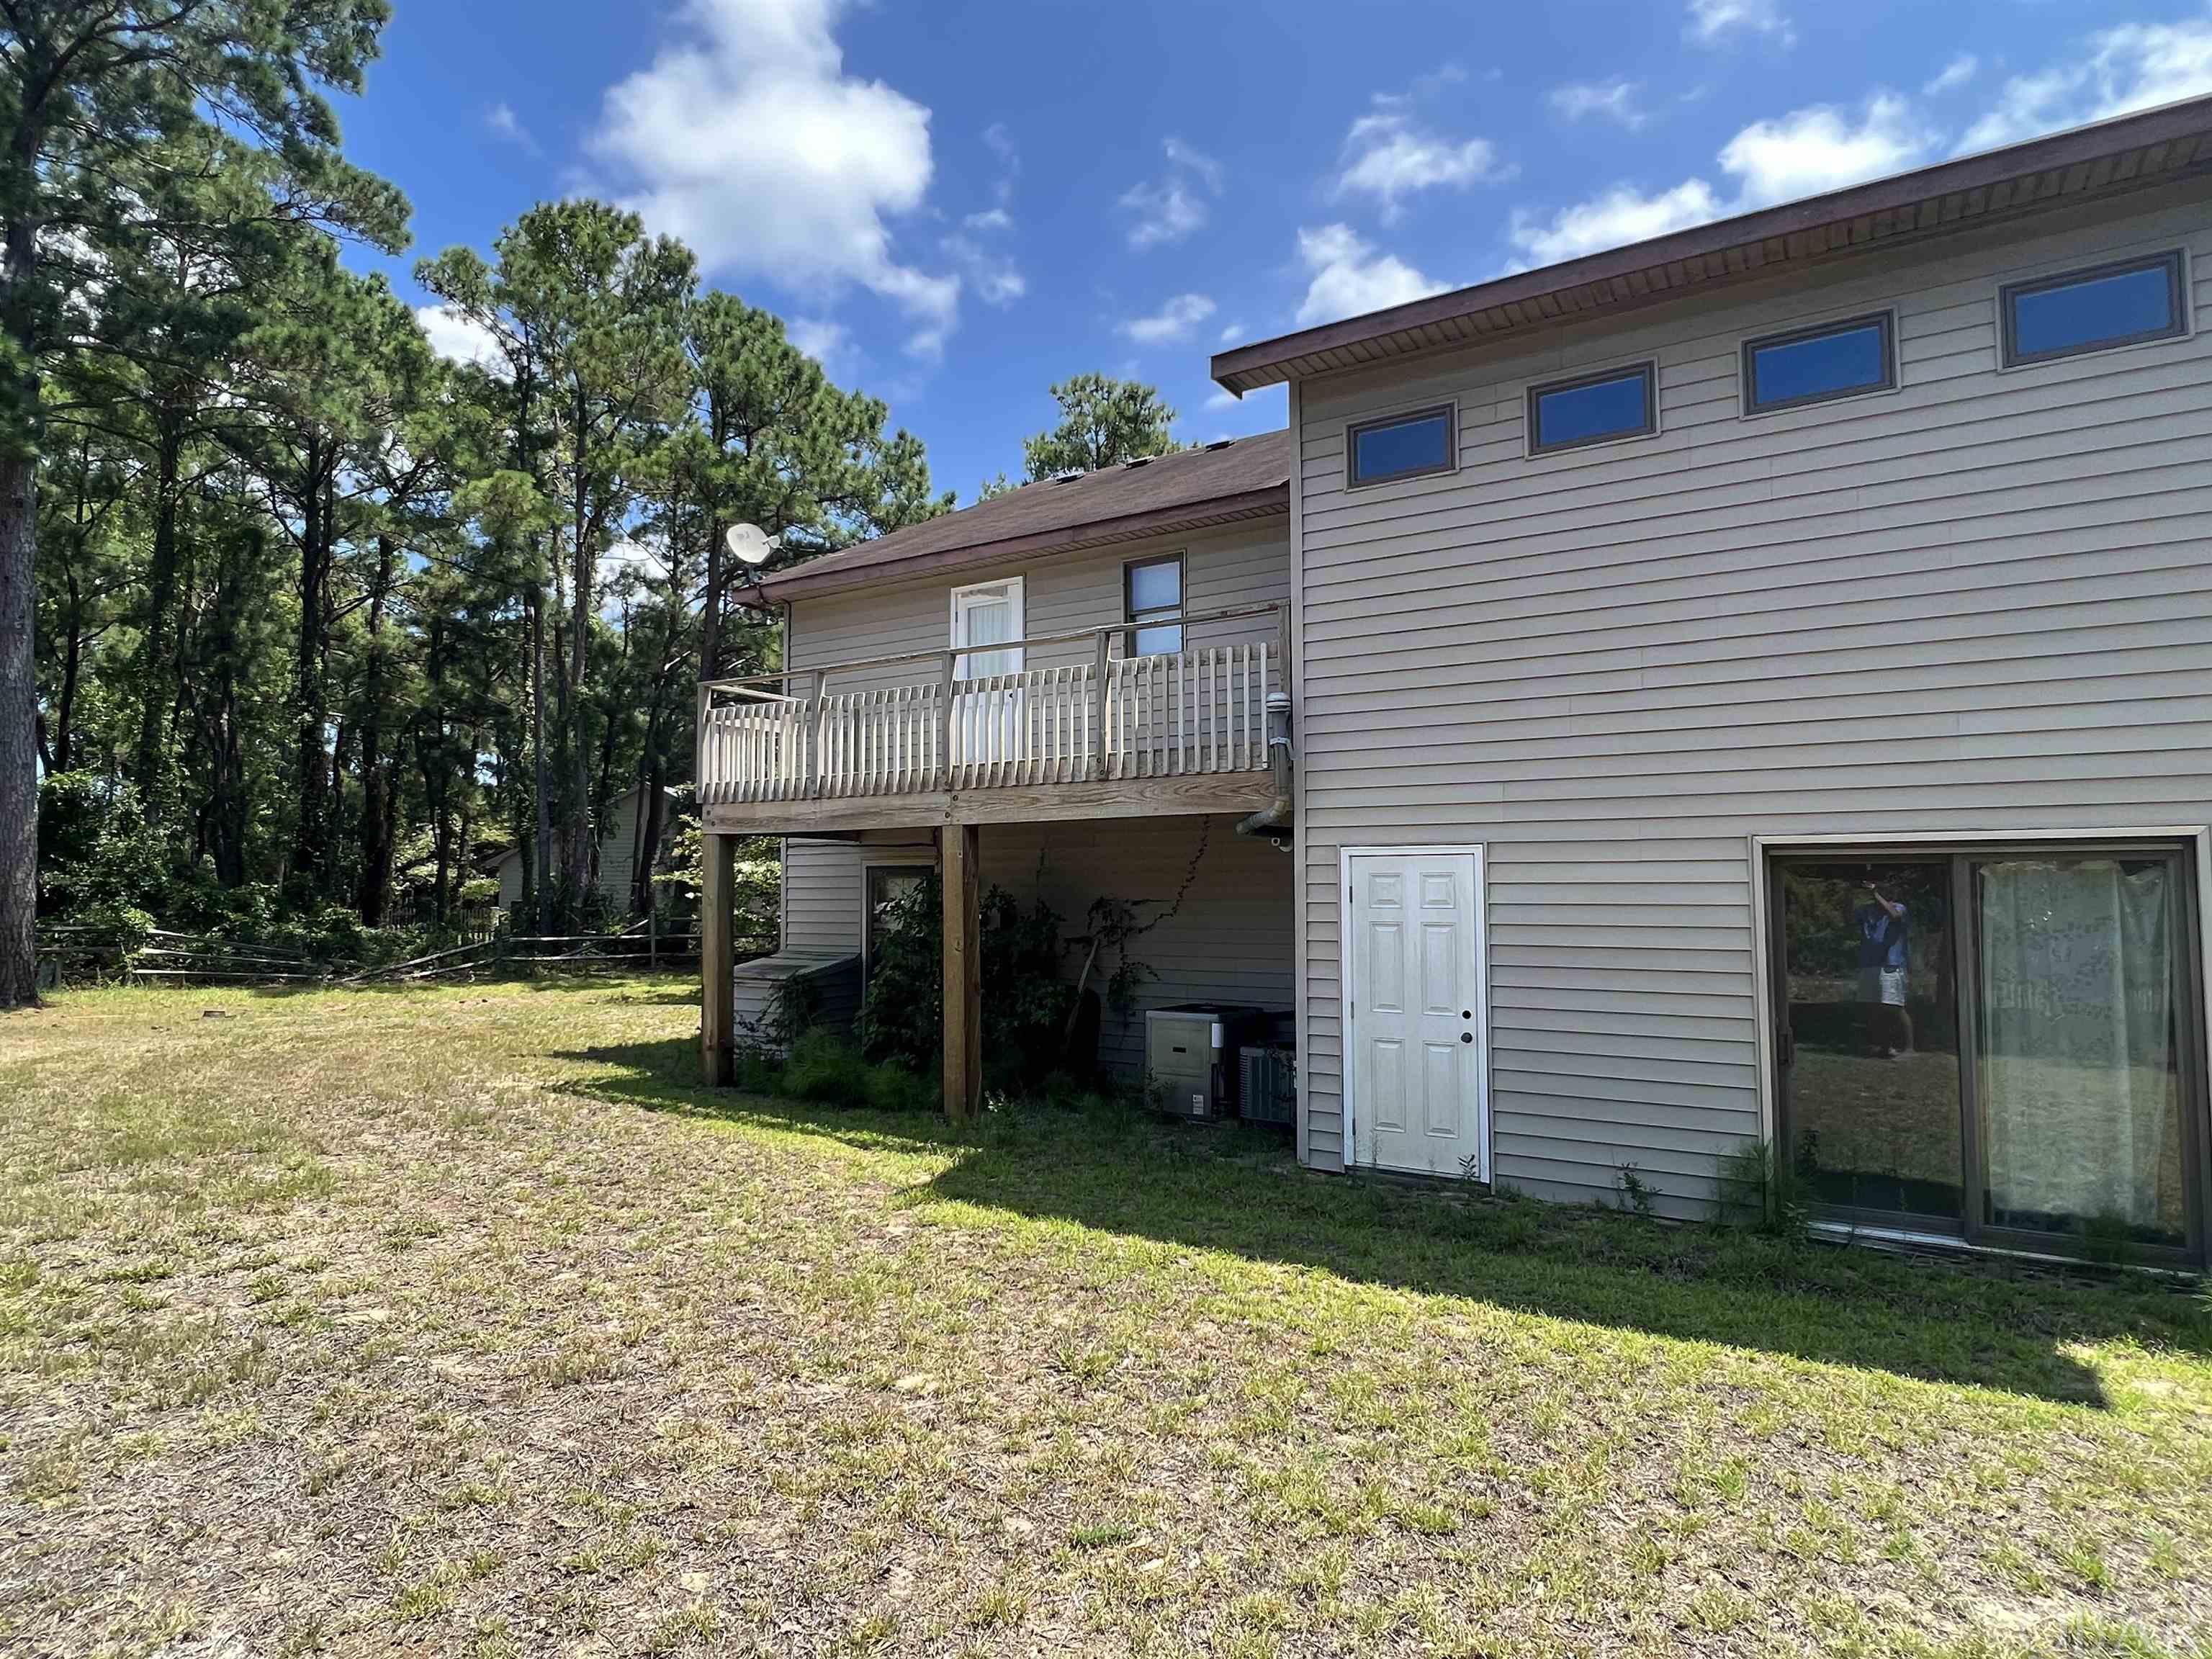 408 Pine Cone Court, Kill Devil Hills, NC 27948, 3 Bedrooms Bedrooms, ,2 BathroomsBathrooms,Residential,For sale,Pine Cone Court,123063